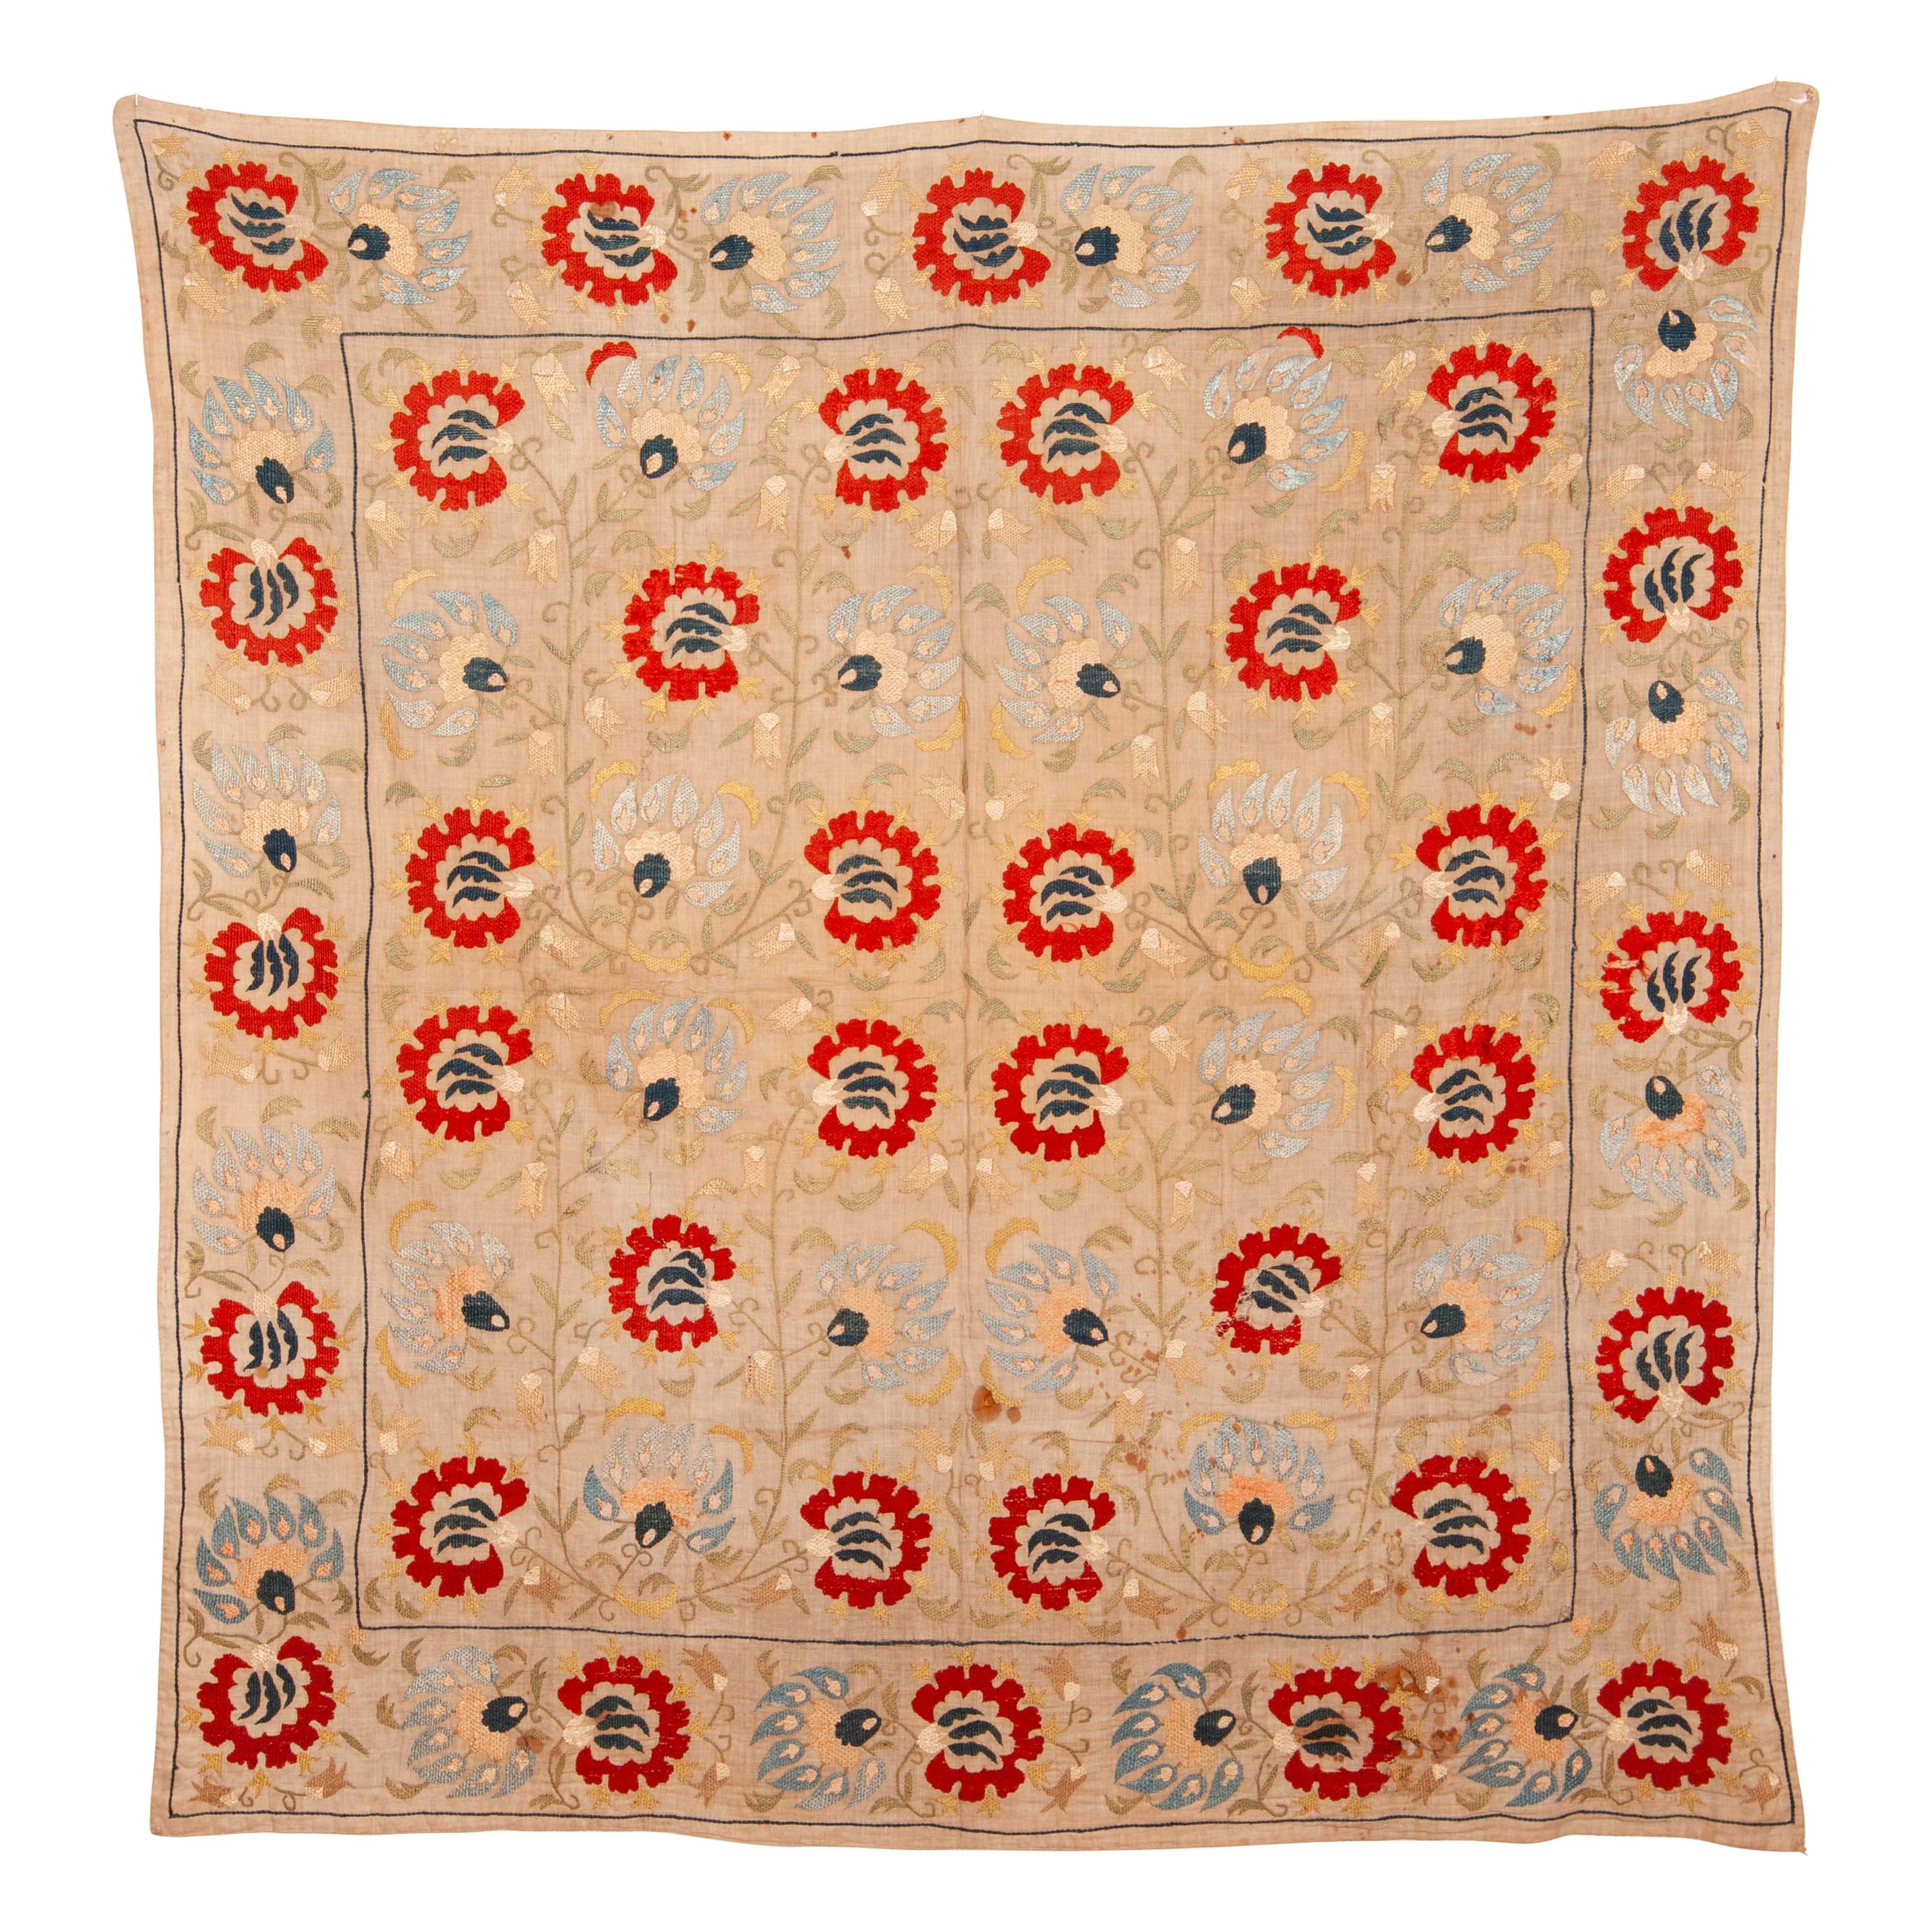 Ottoman Turkish Bokhce 'Wrapping Cloth', Early 19th Century